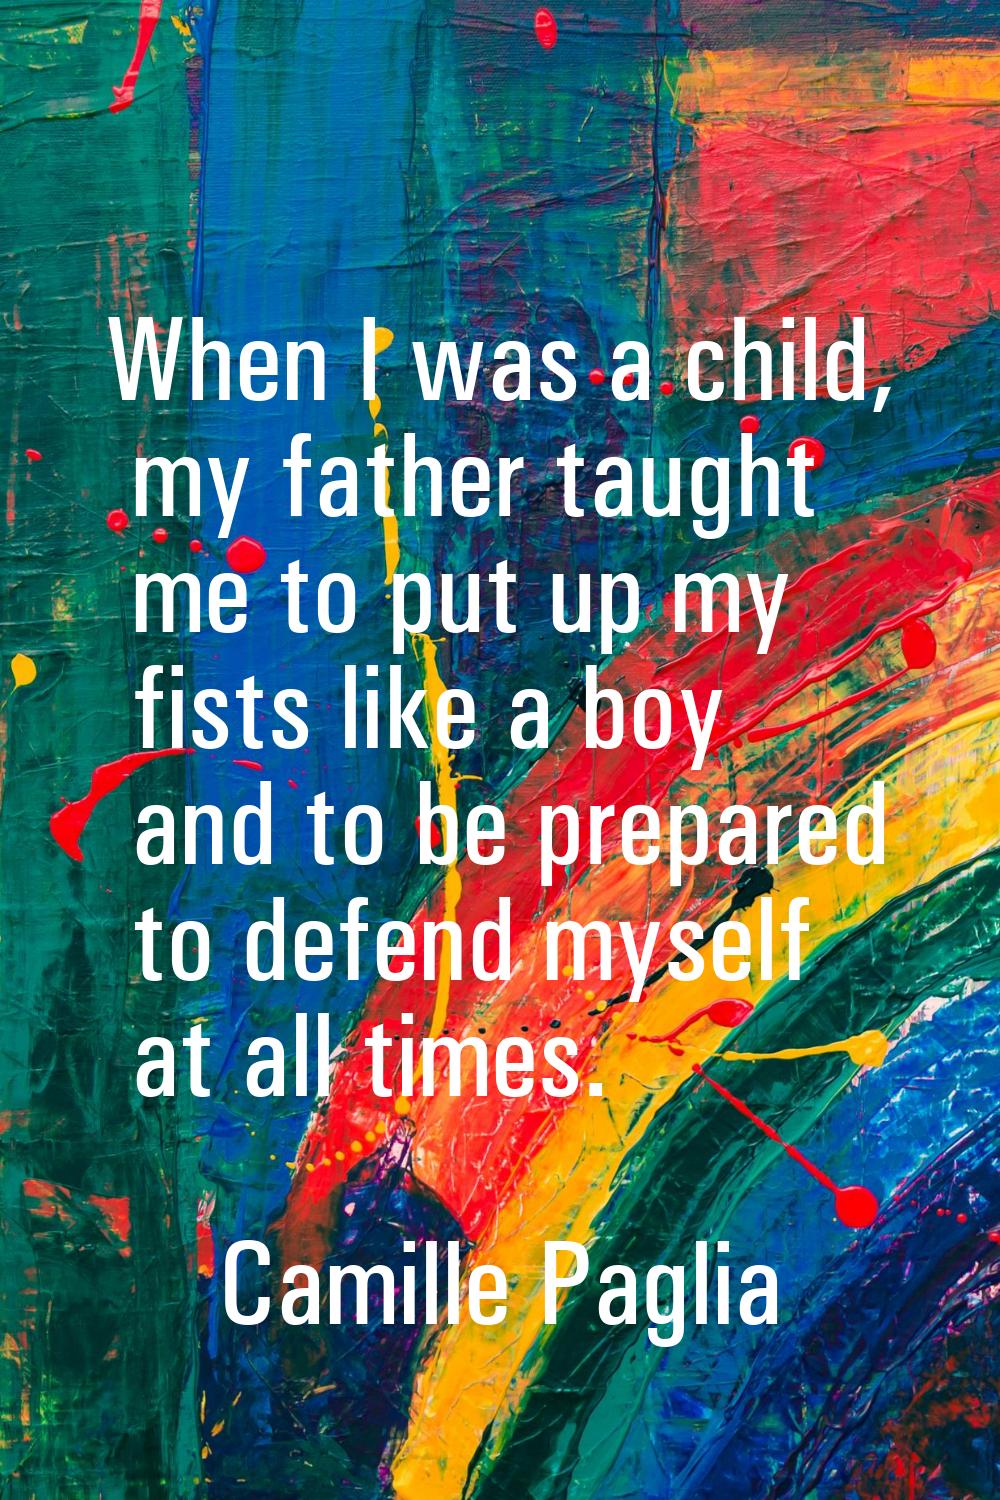 When I was a child, my father taught me to put up my fists like a boy and to be prepared to defend 